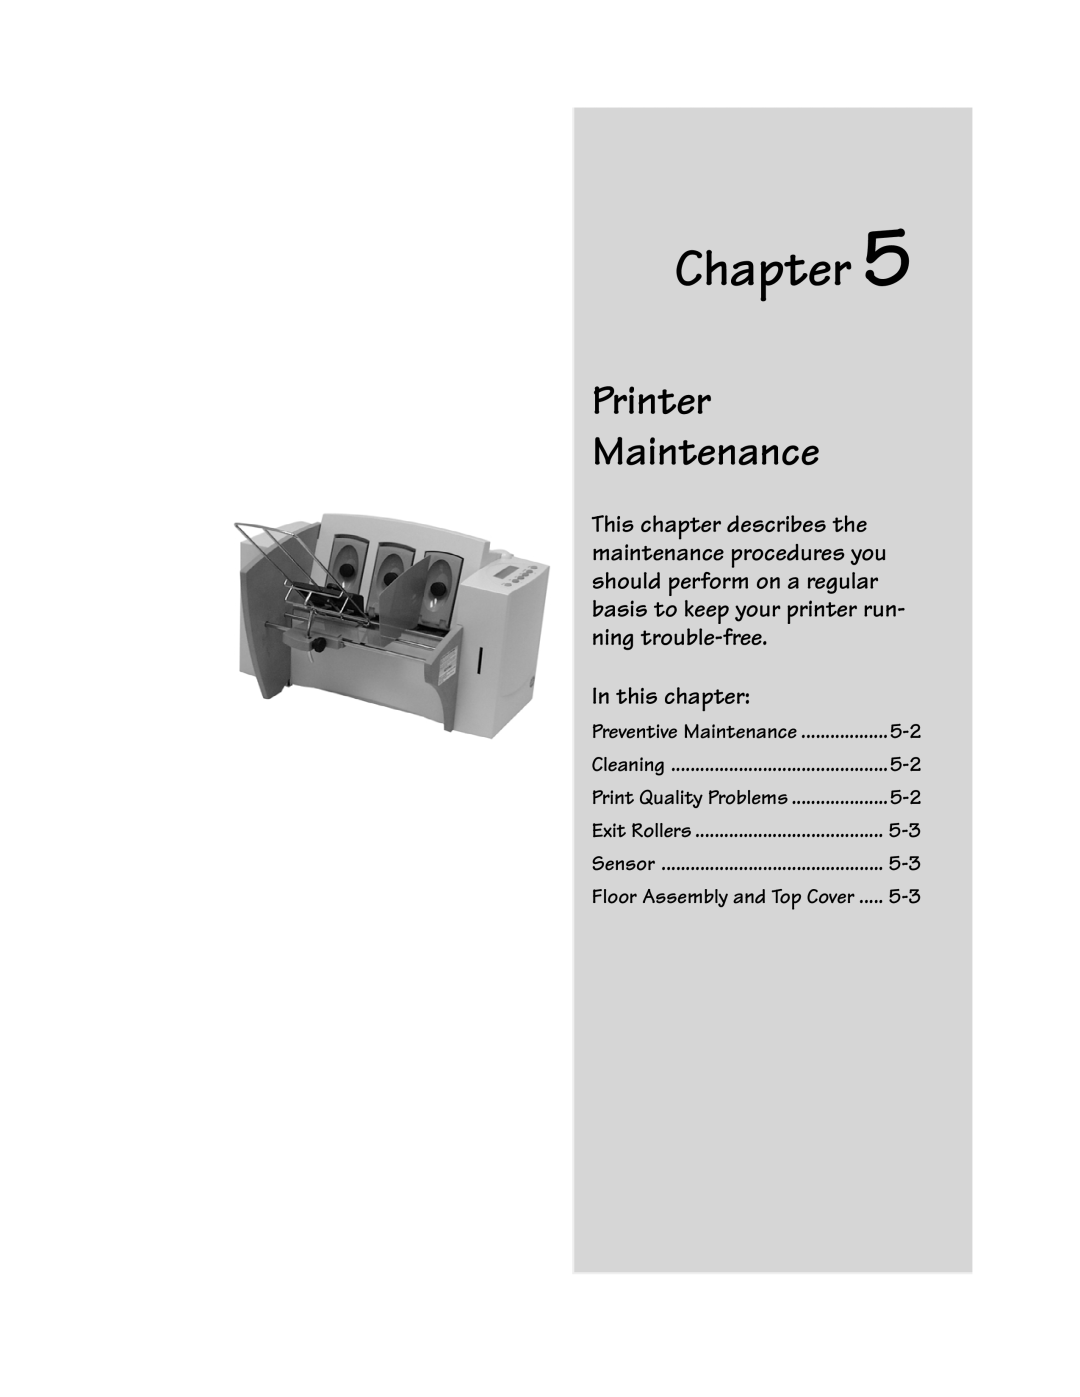 Pitney Bowes W680 Printer Maintenance, Chapter, In this chapter, Floor Assembly and Top Cover, Preventive Maintenance 